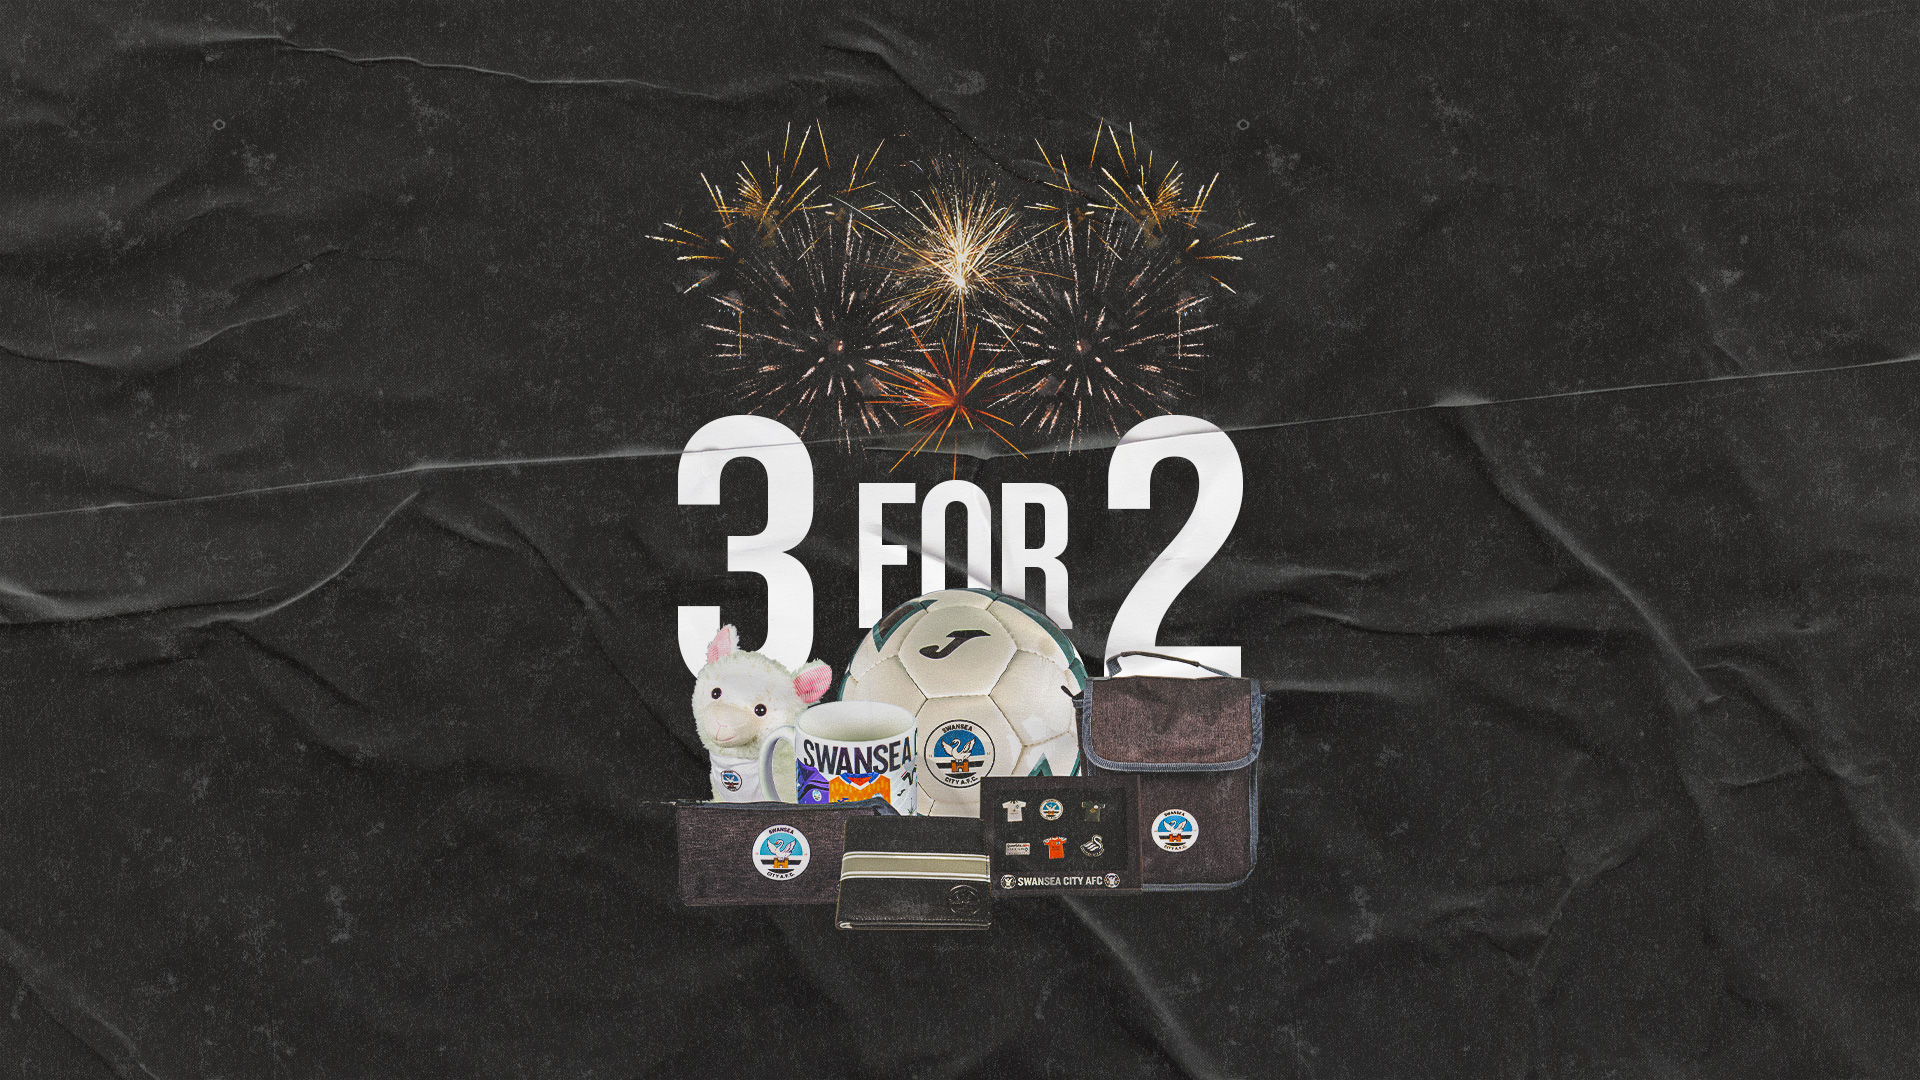 3 for 2 offer available on selected gifts